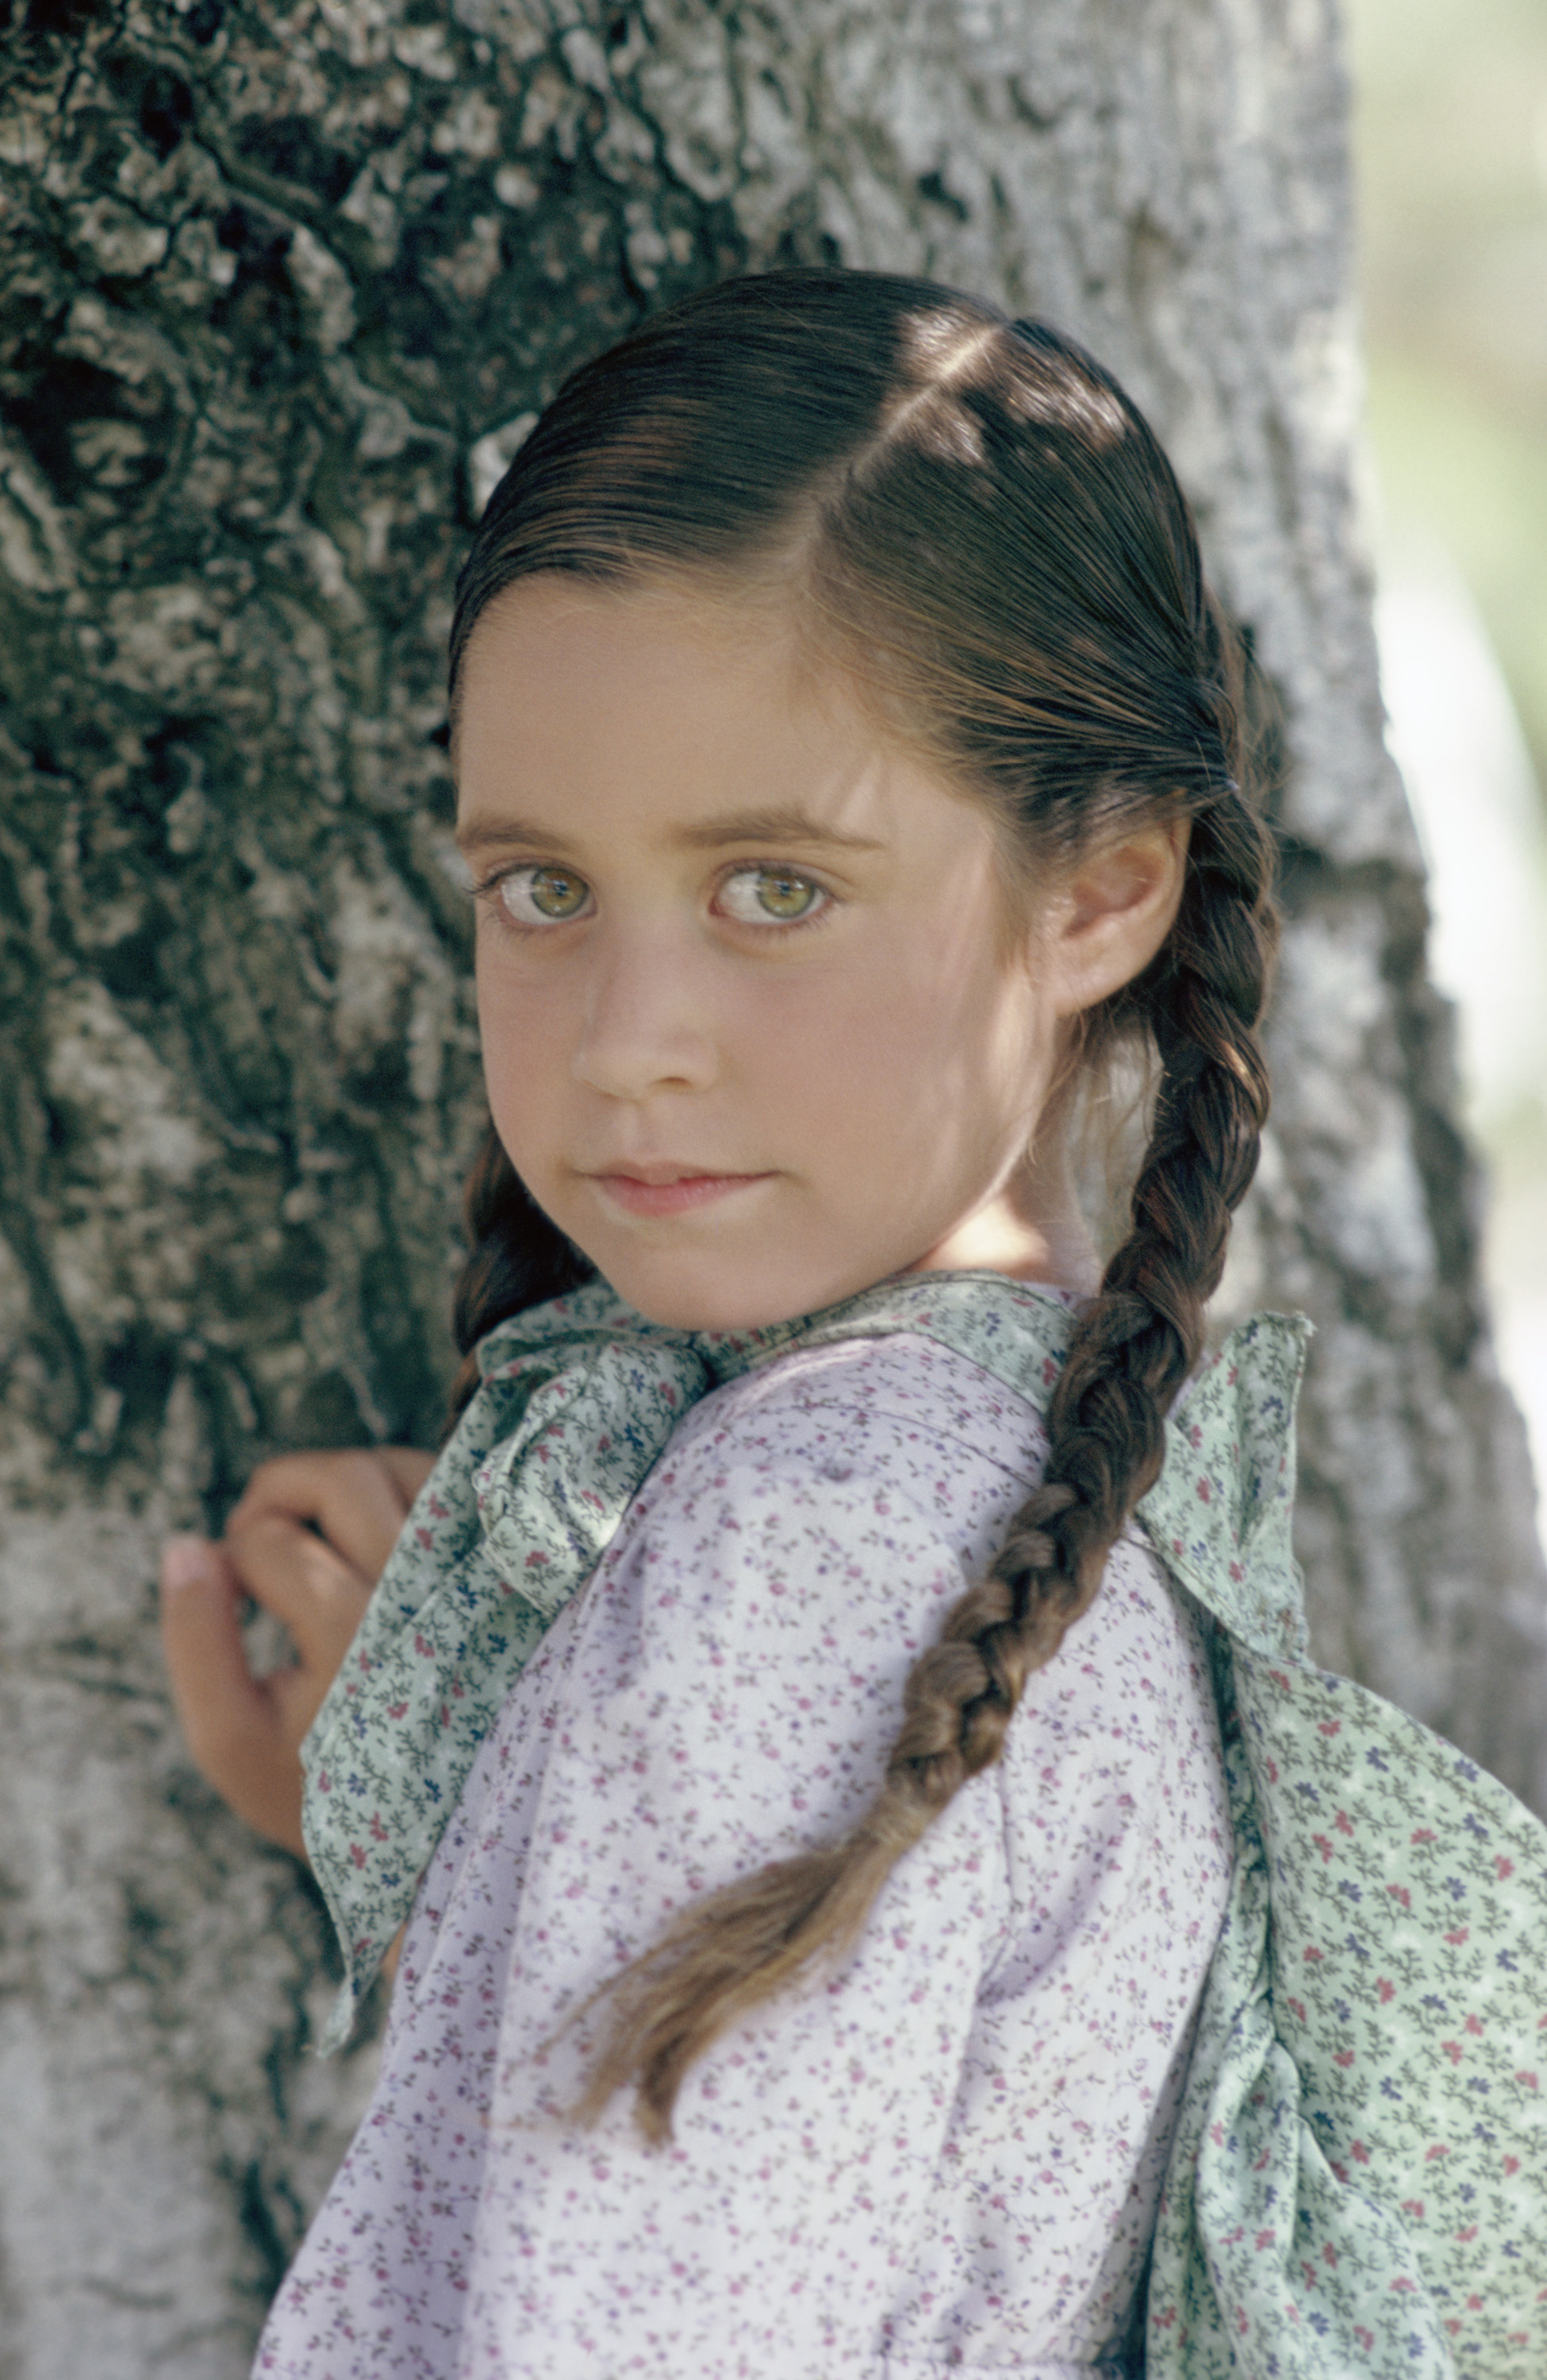 Melissa Francis as Cassandra Cooper Ingalls, as seen in season 8 of "Little House on the Prairie." | Source: Getty Images